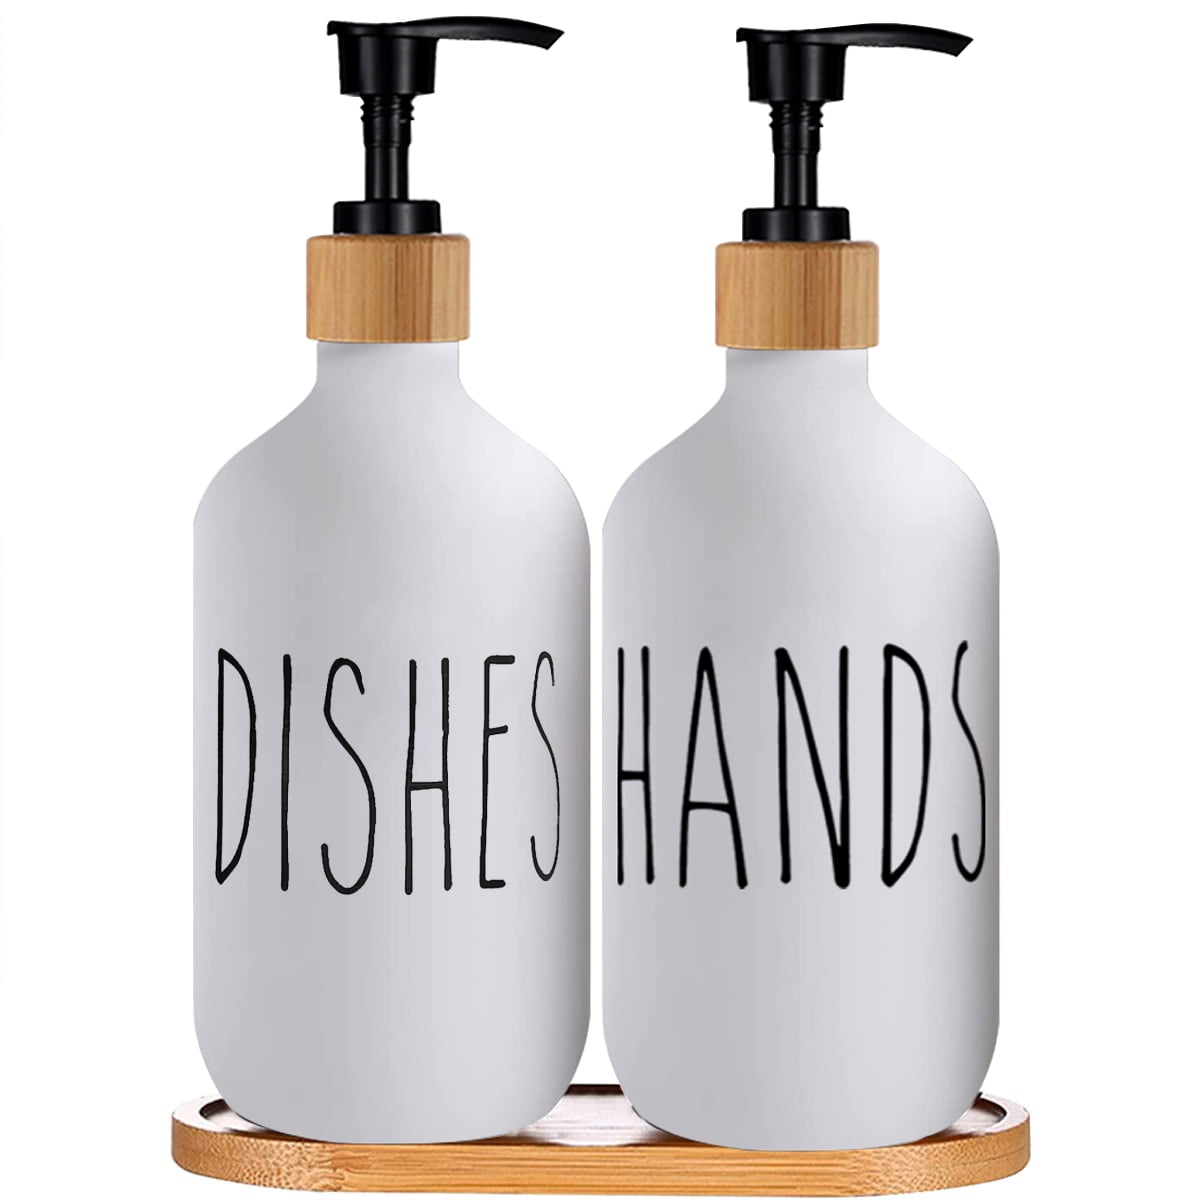 OUNAMIO Dish Soap Dispenser with Pumps and Bamboo Tray, Hand Soap Dispenser  for Bathroom, Kitchen Soap Dispenser Set